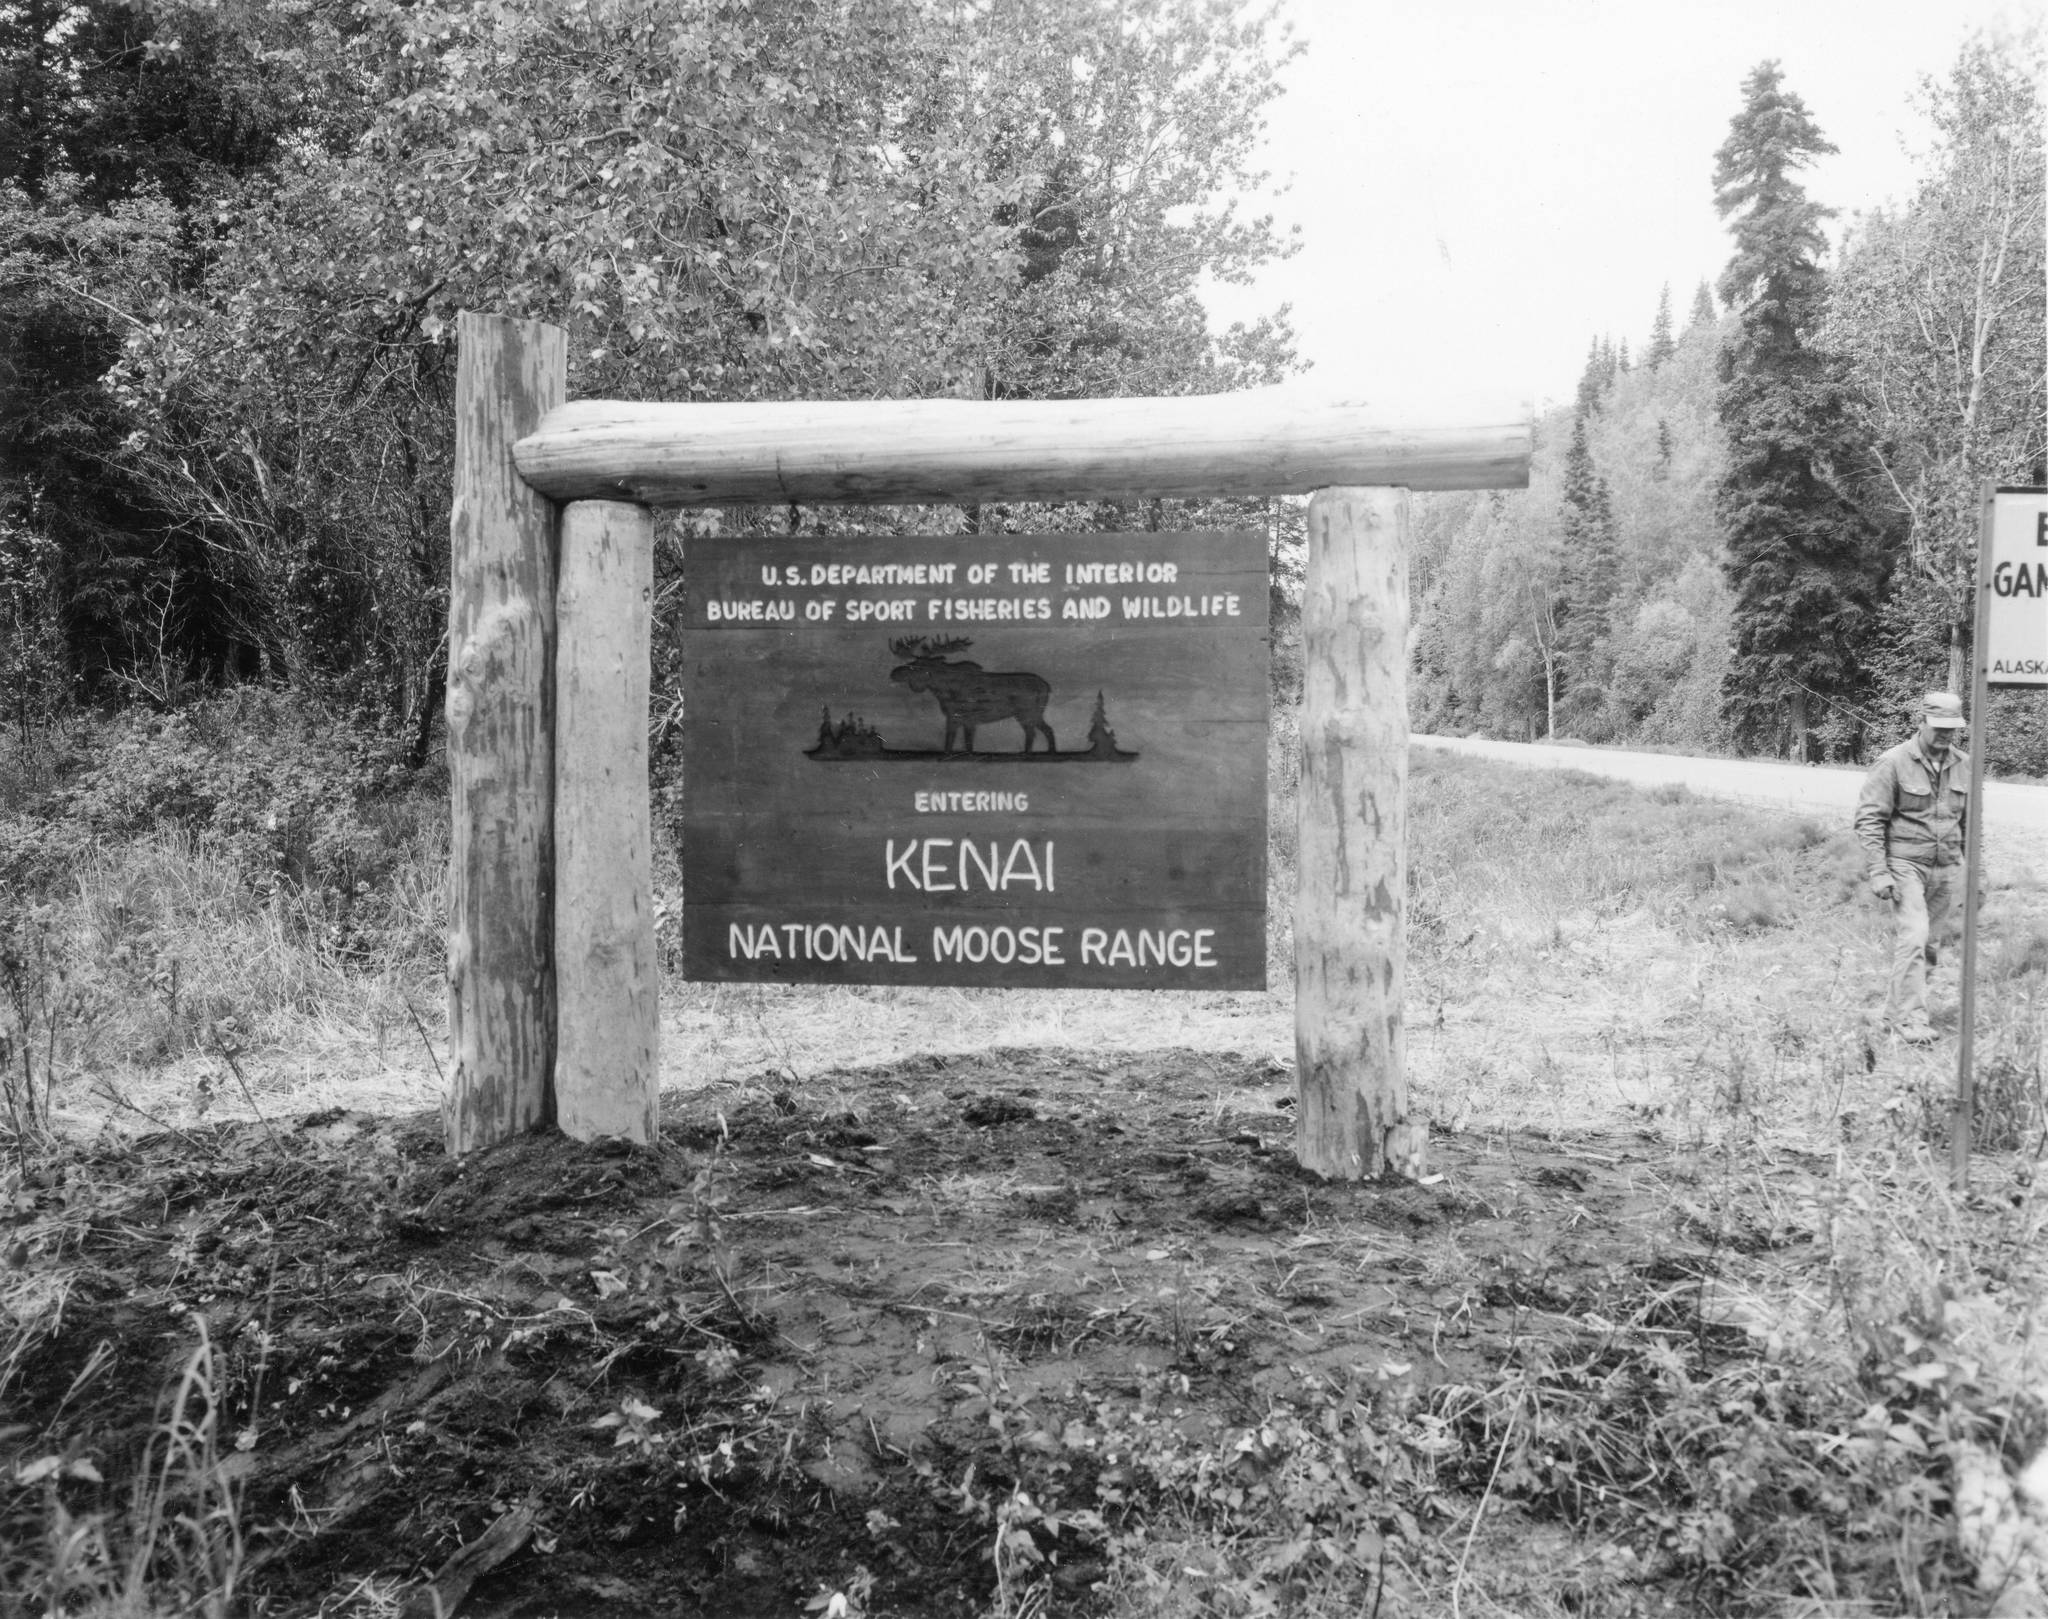 The Kenai National Wildlife Refuge was established in 1941 after a grass-roots effort by big game hunters to protect dwindling wildlife populations. (credit: USFWS)